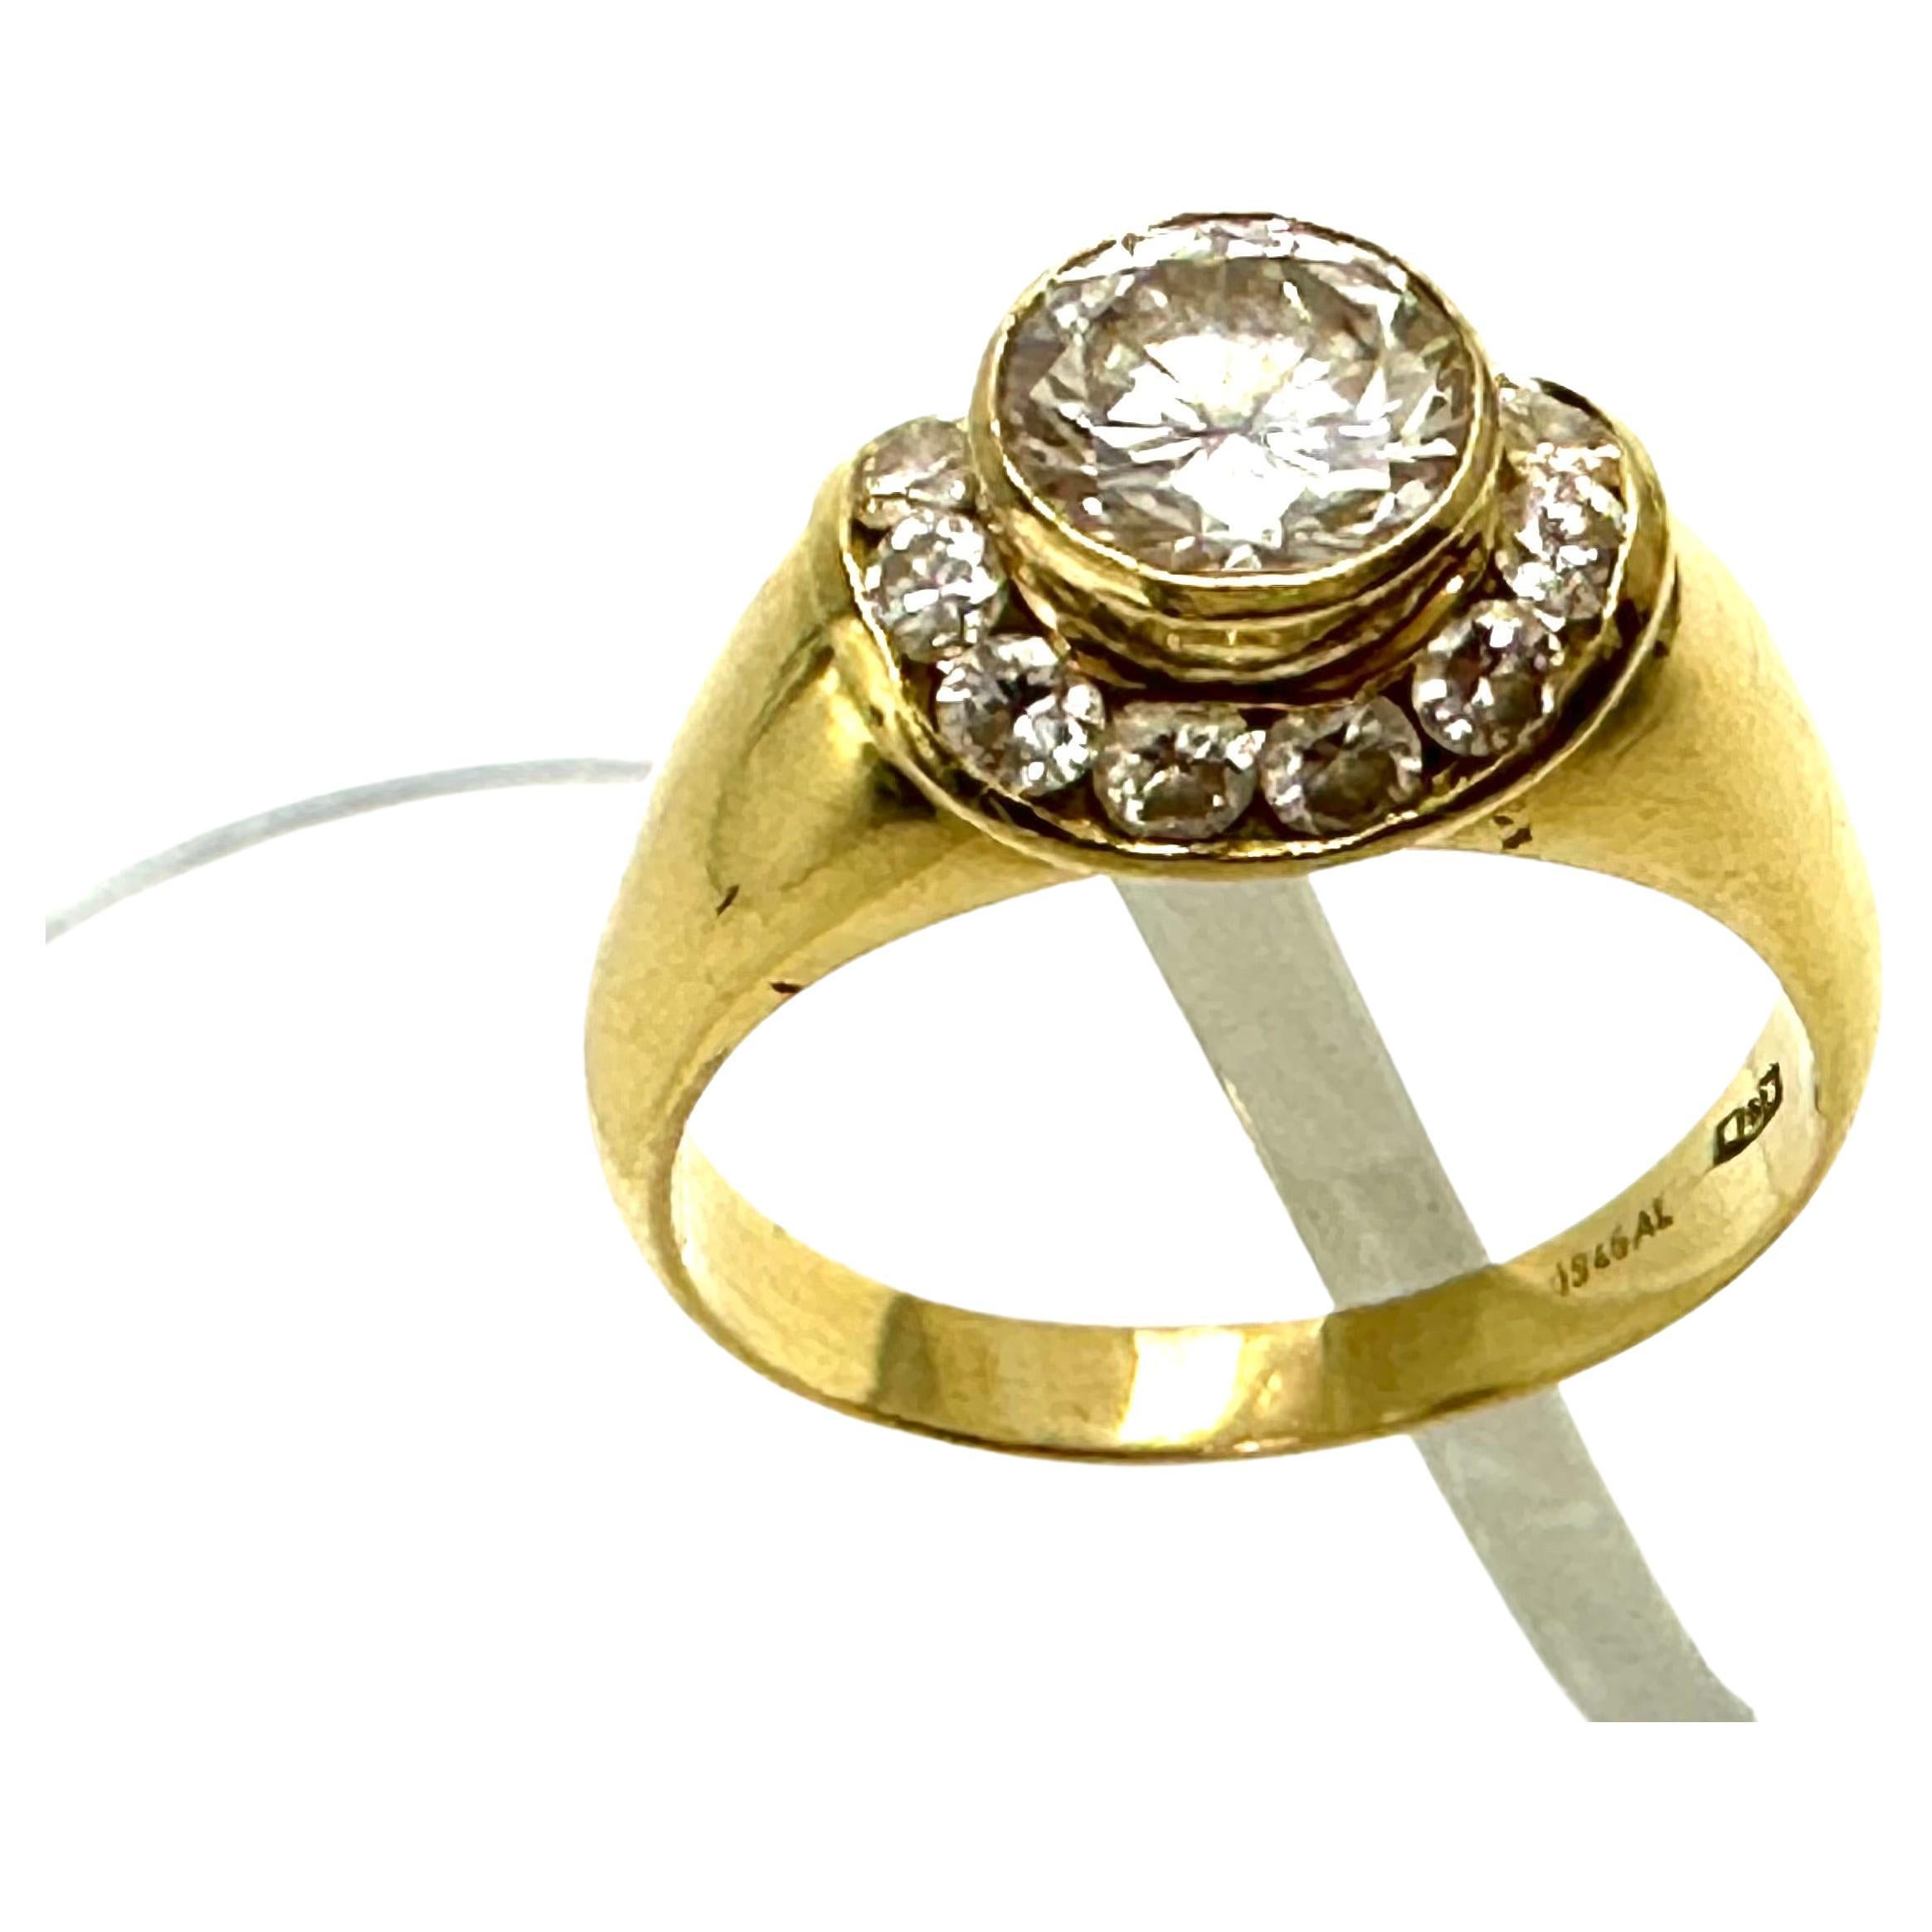 Wonderful convex band ring with diamonds For Sale